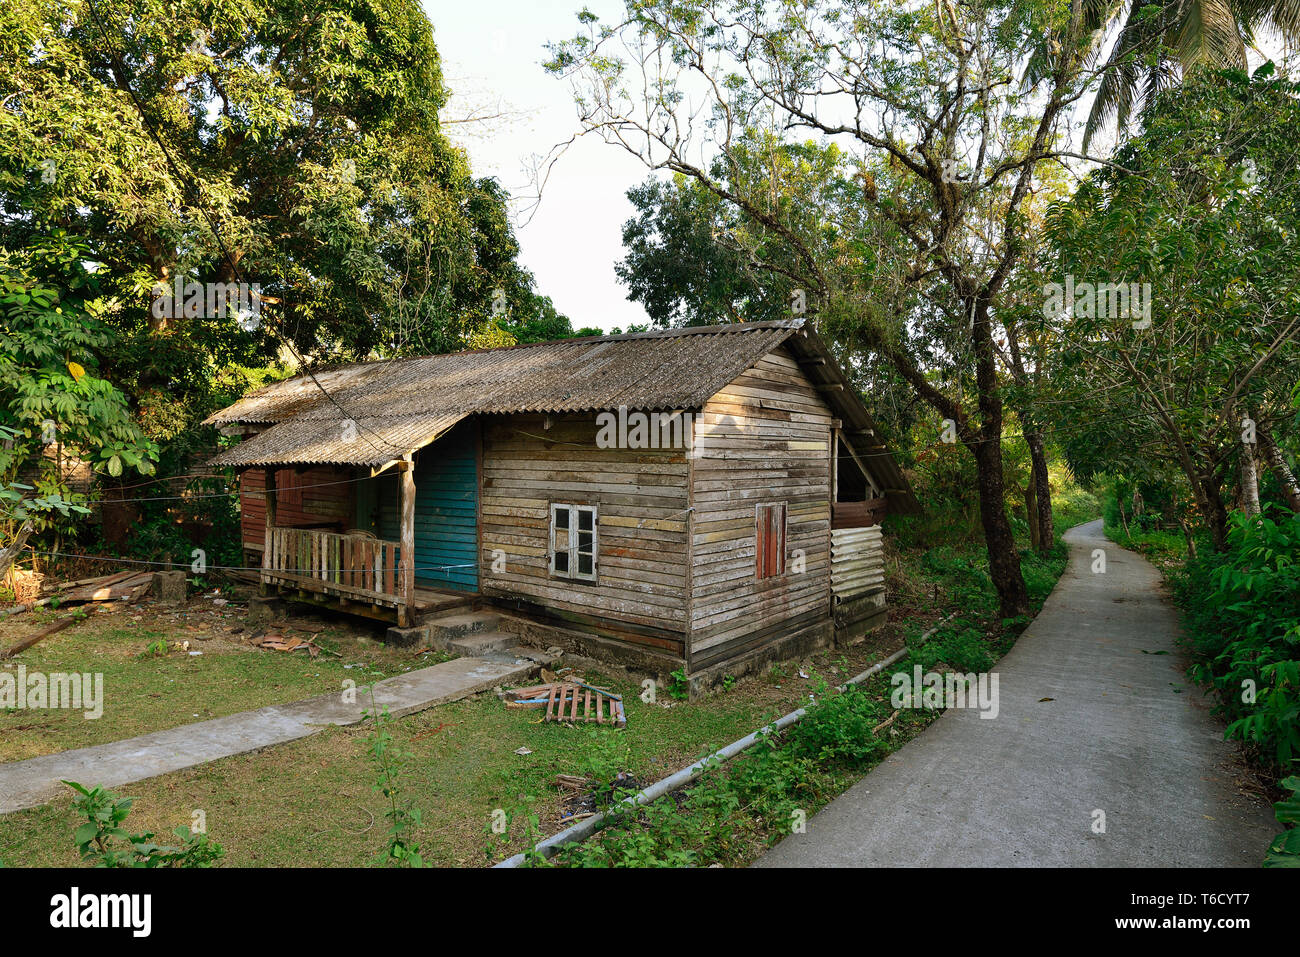 Old wooden house of an islanders Long Island, Andaman and Nicobar Islands, India Stock Photo